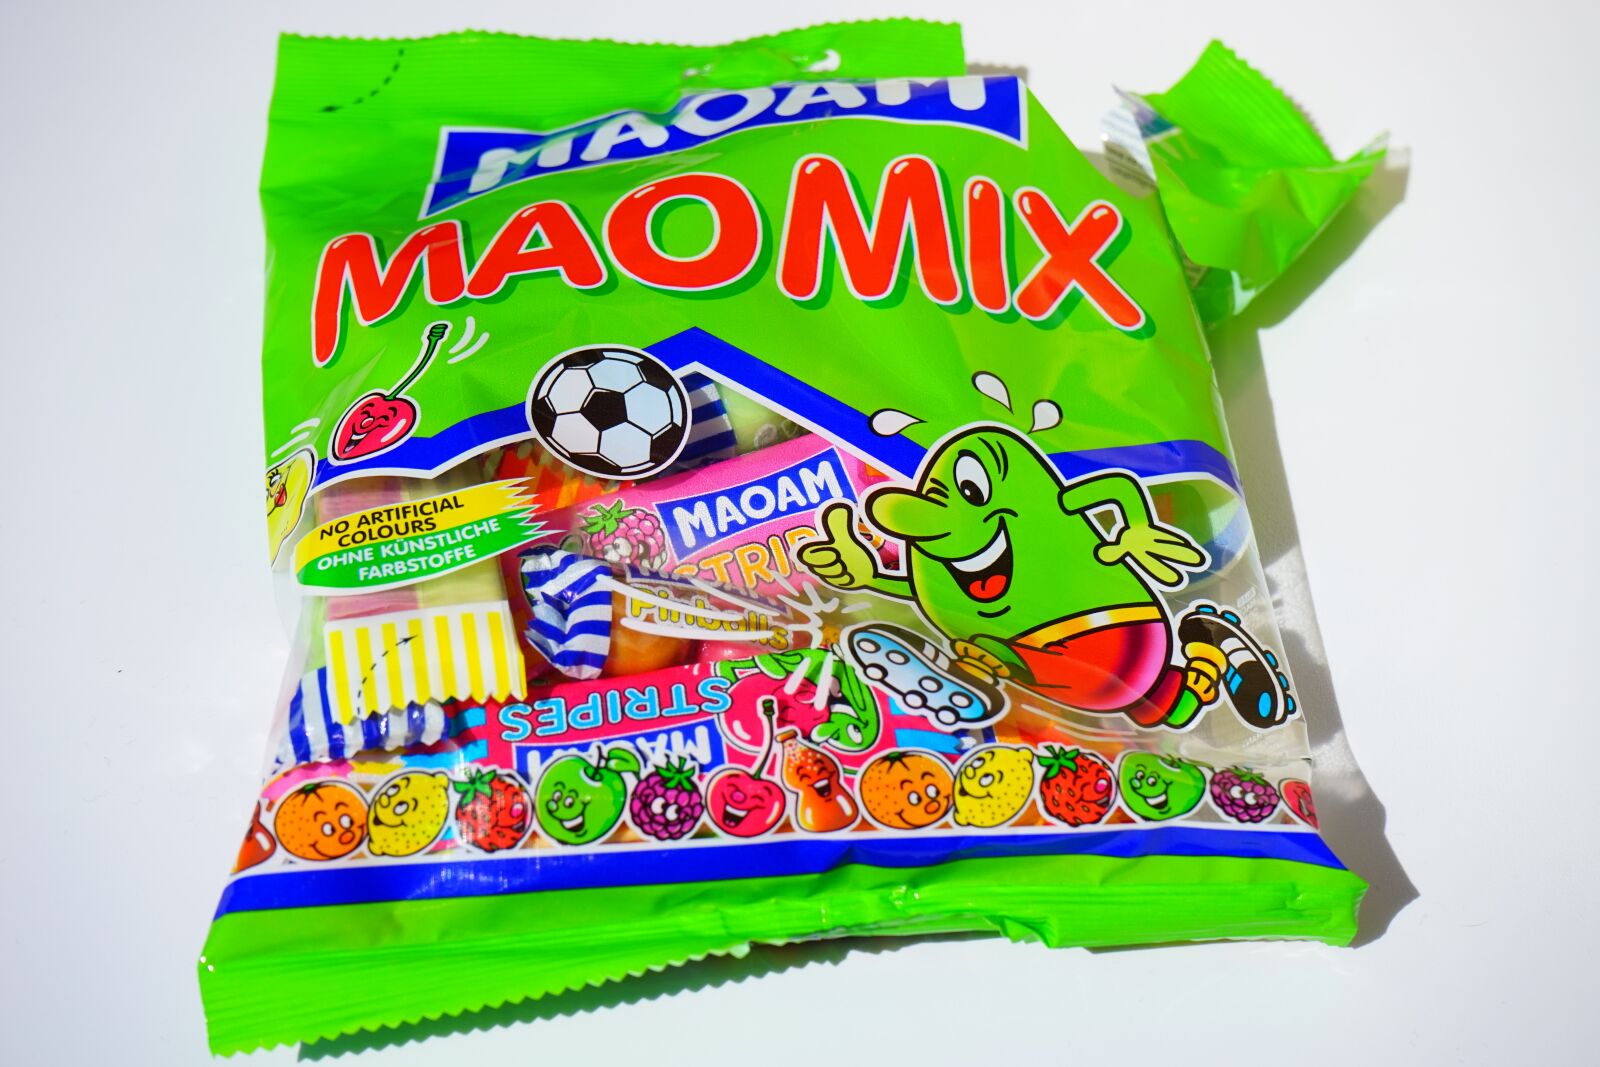 Sony a7 sample photo. Bag, candy bag, maoam photography